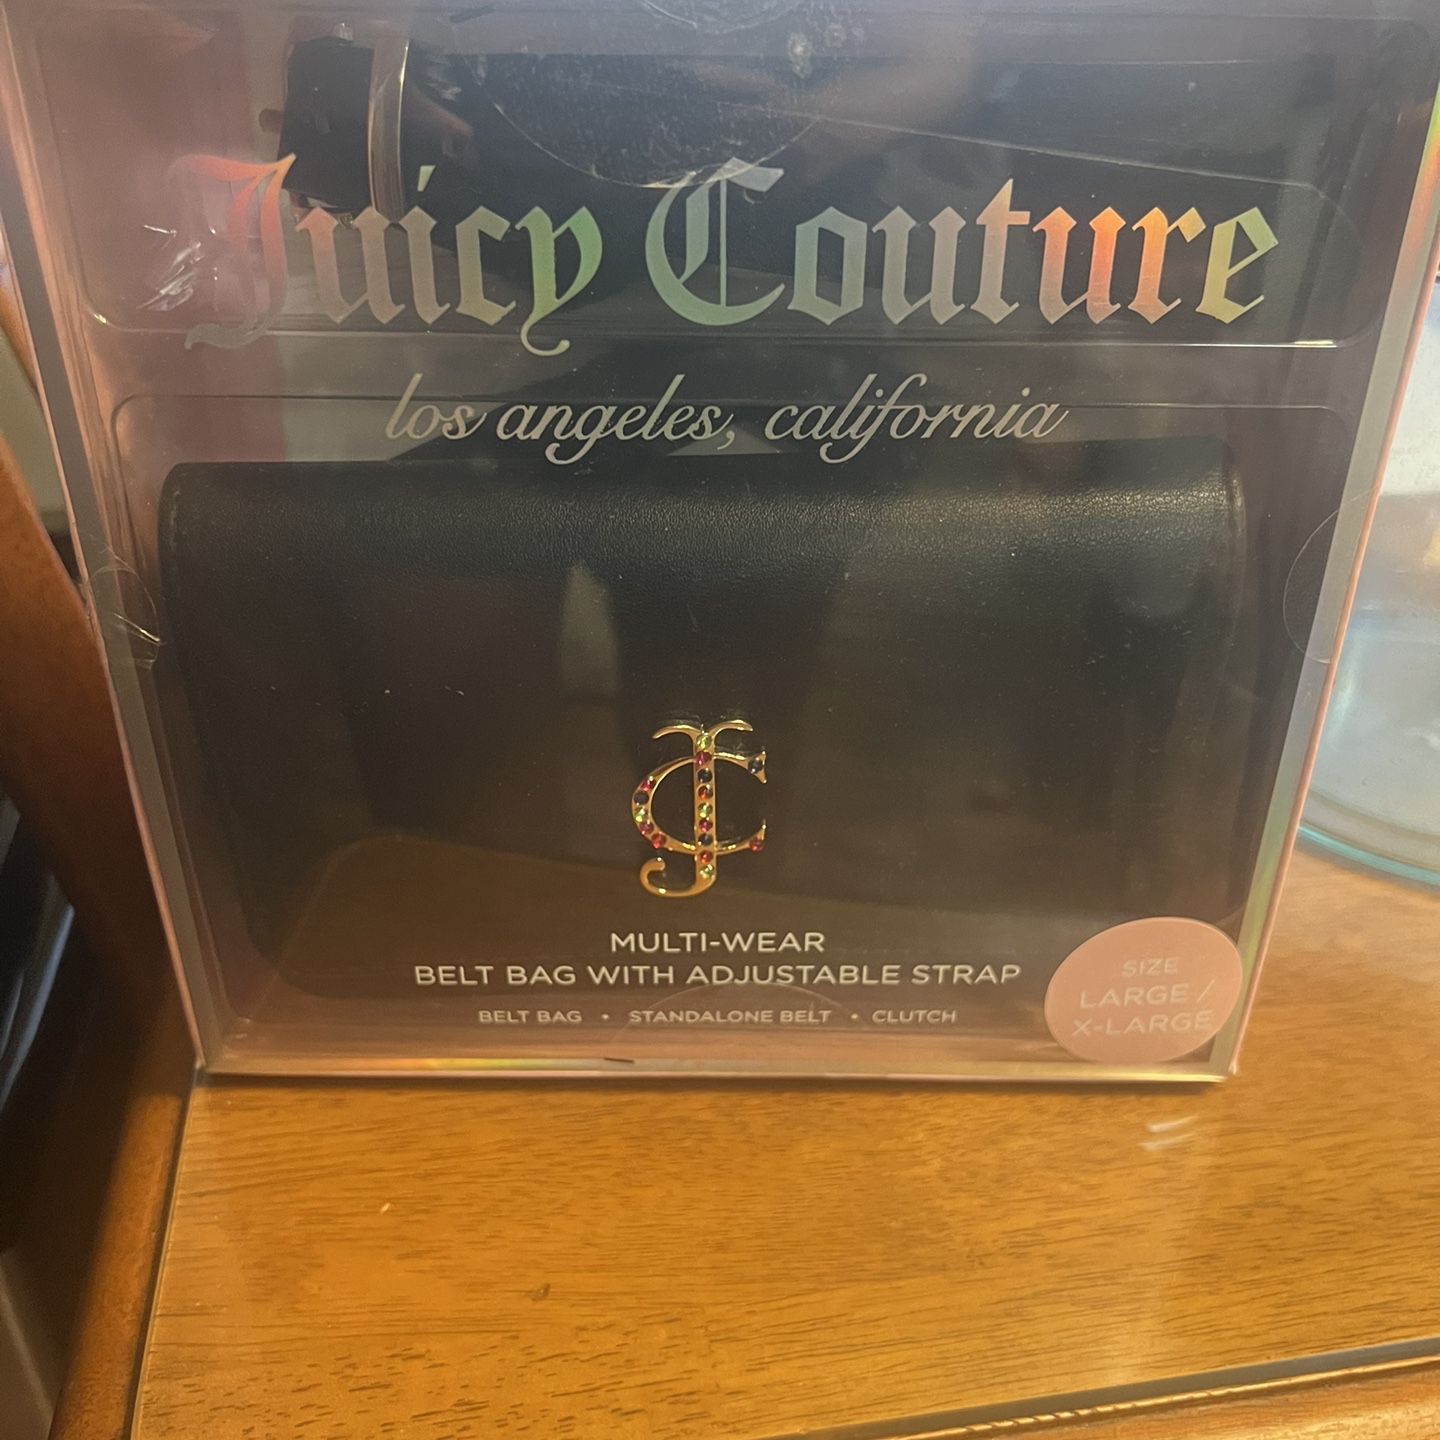 Juicy Couture Jewelry for Sale in Concord, CA - OfferUp